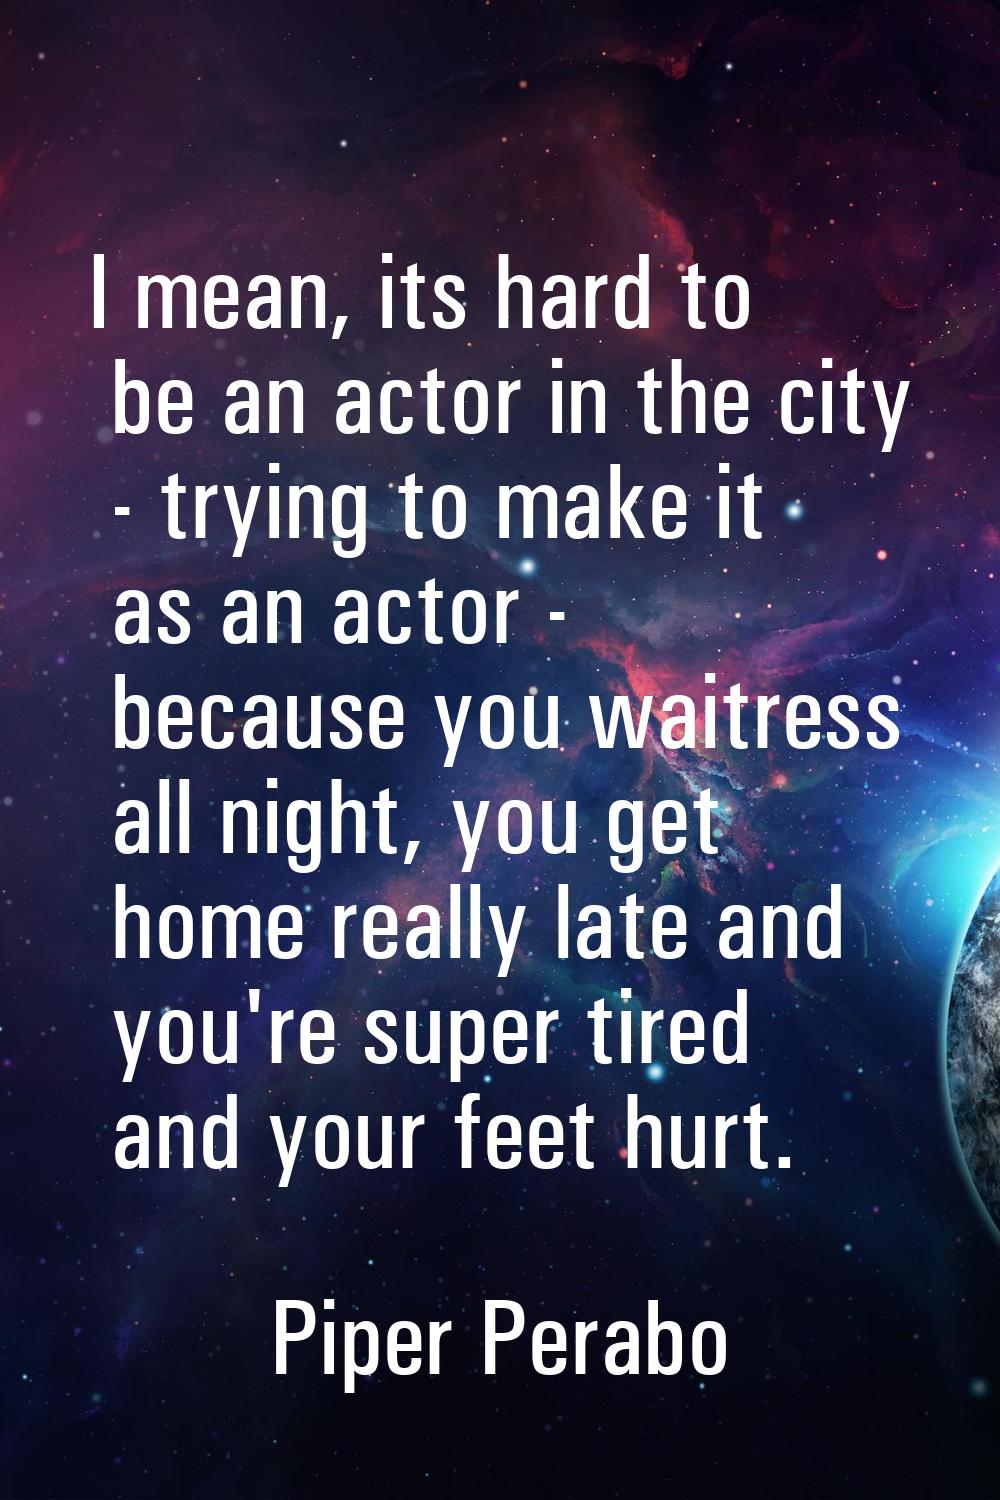 I mean, its hard to be an actor in the city - trying to make it as an actor - because you waitress 